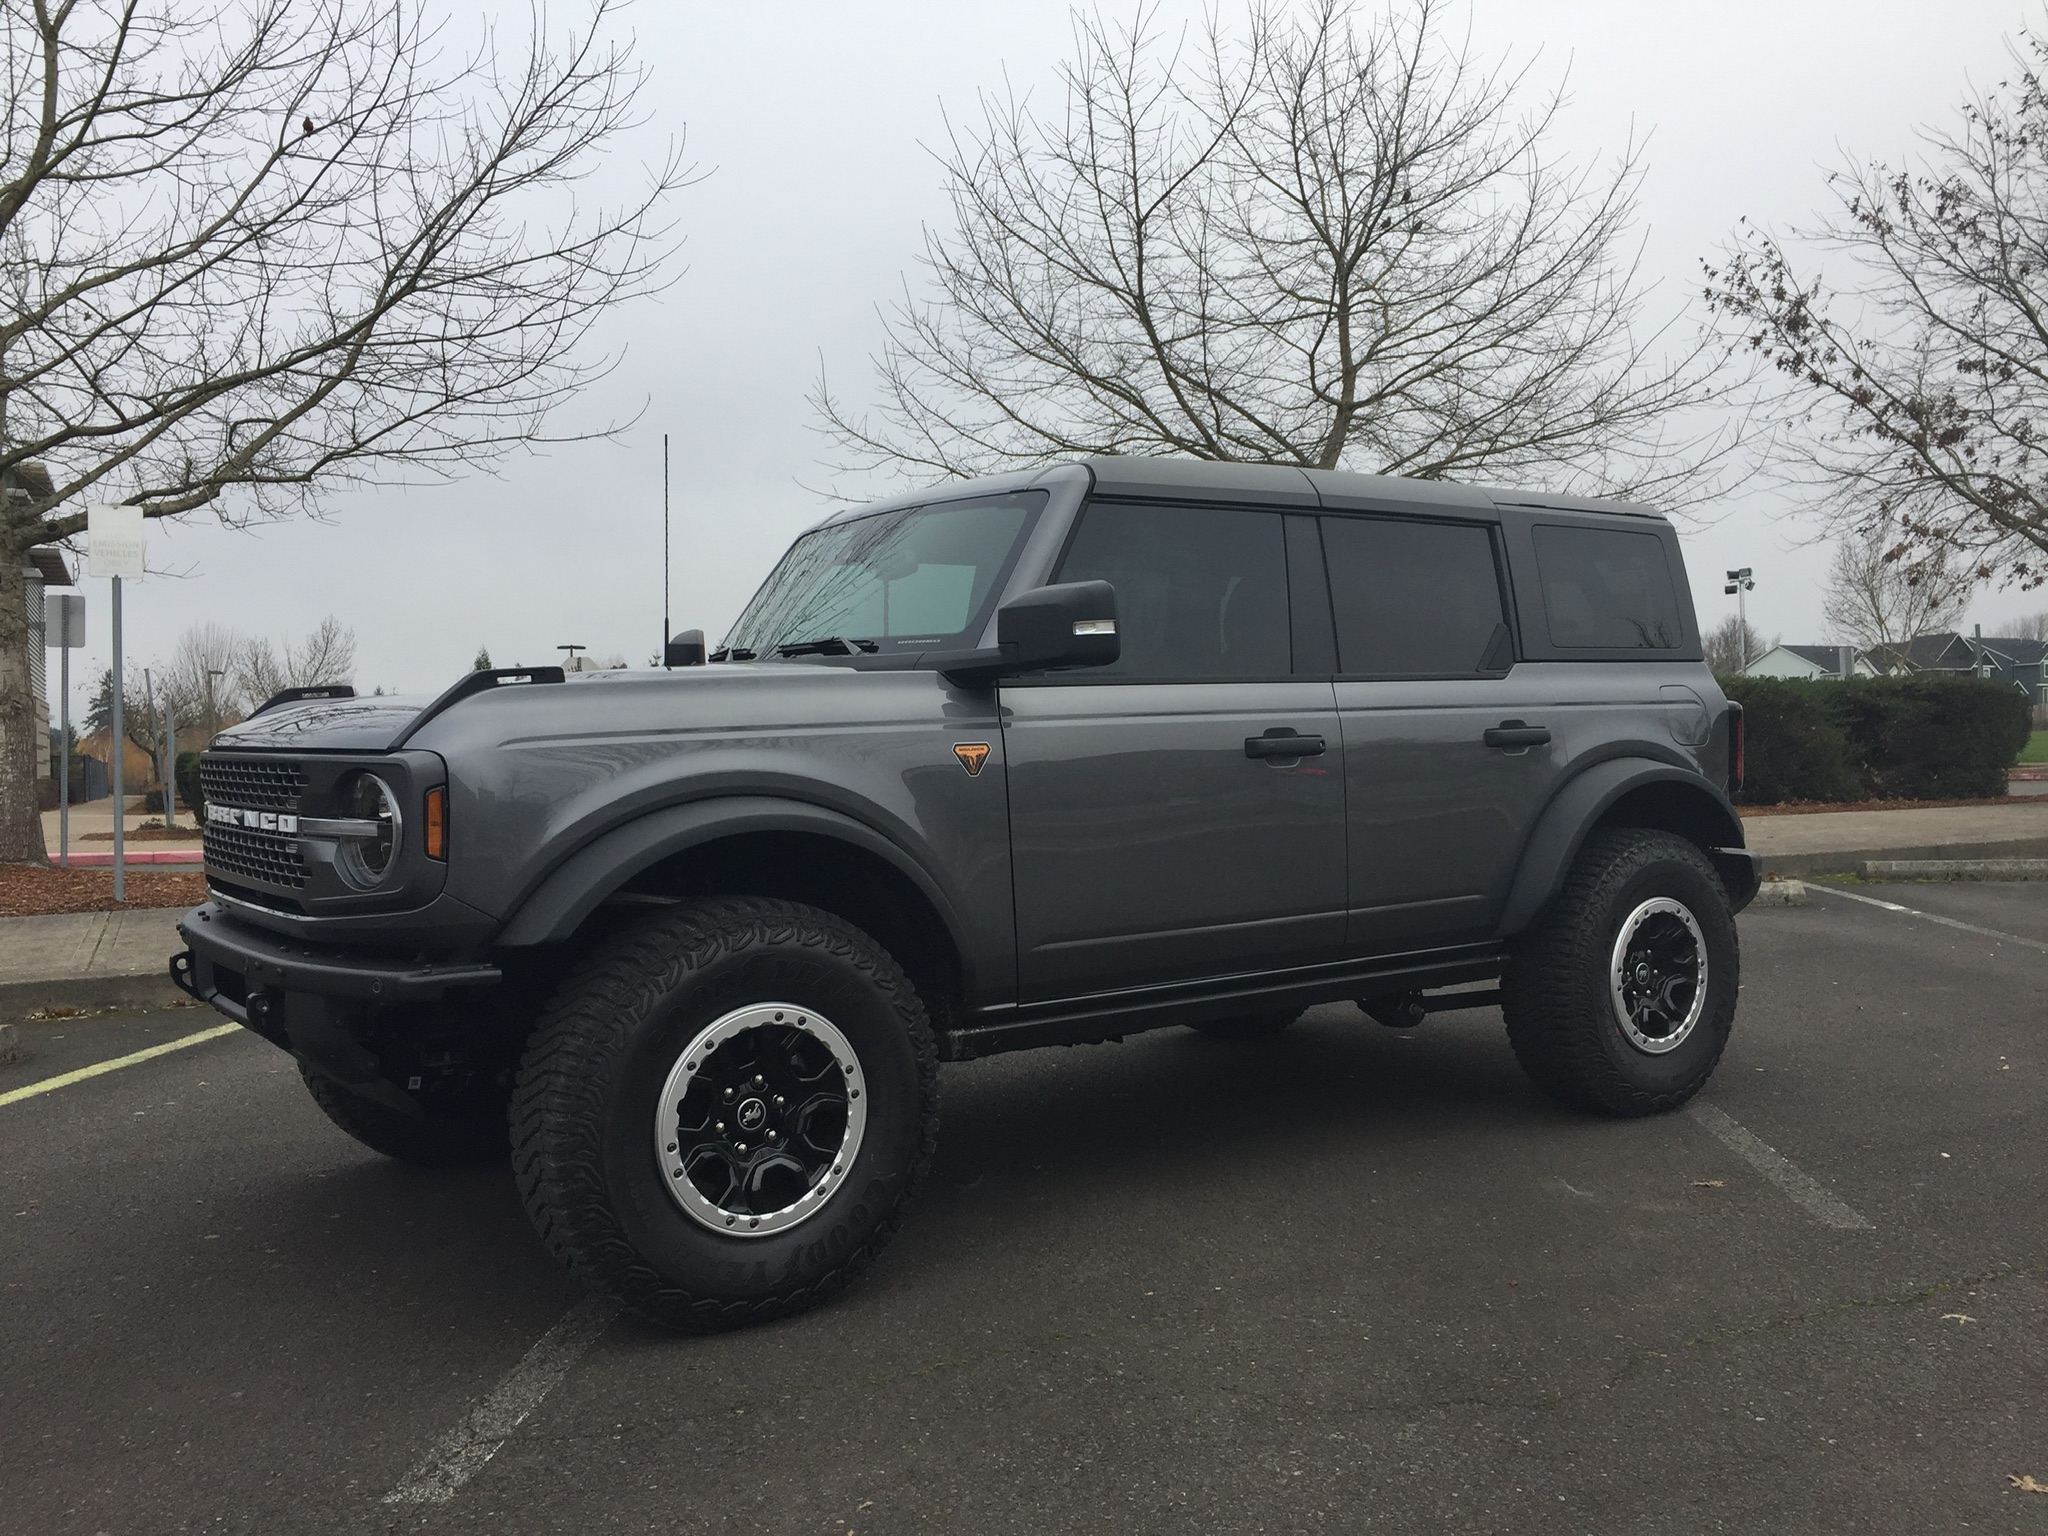 Ford Bronco Updates - NW Bronco T1